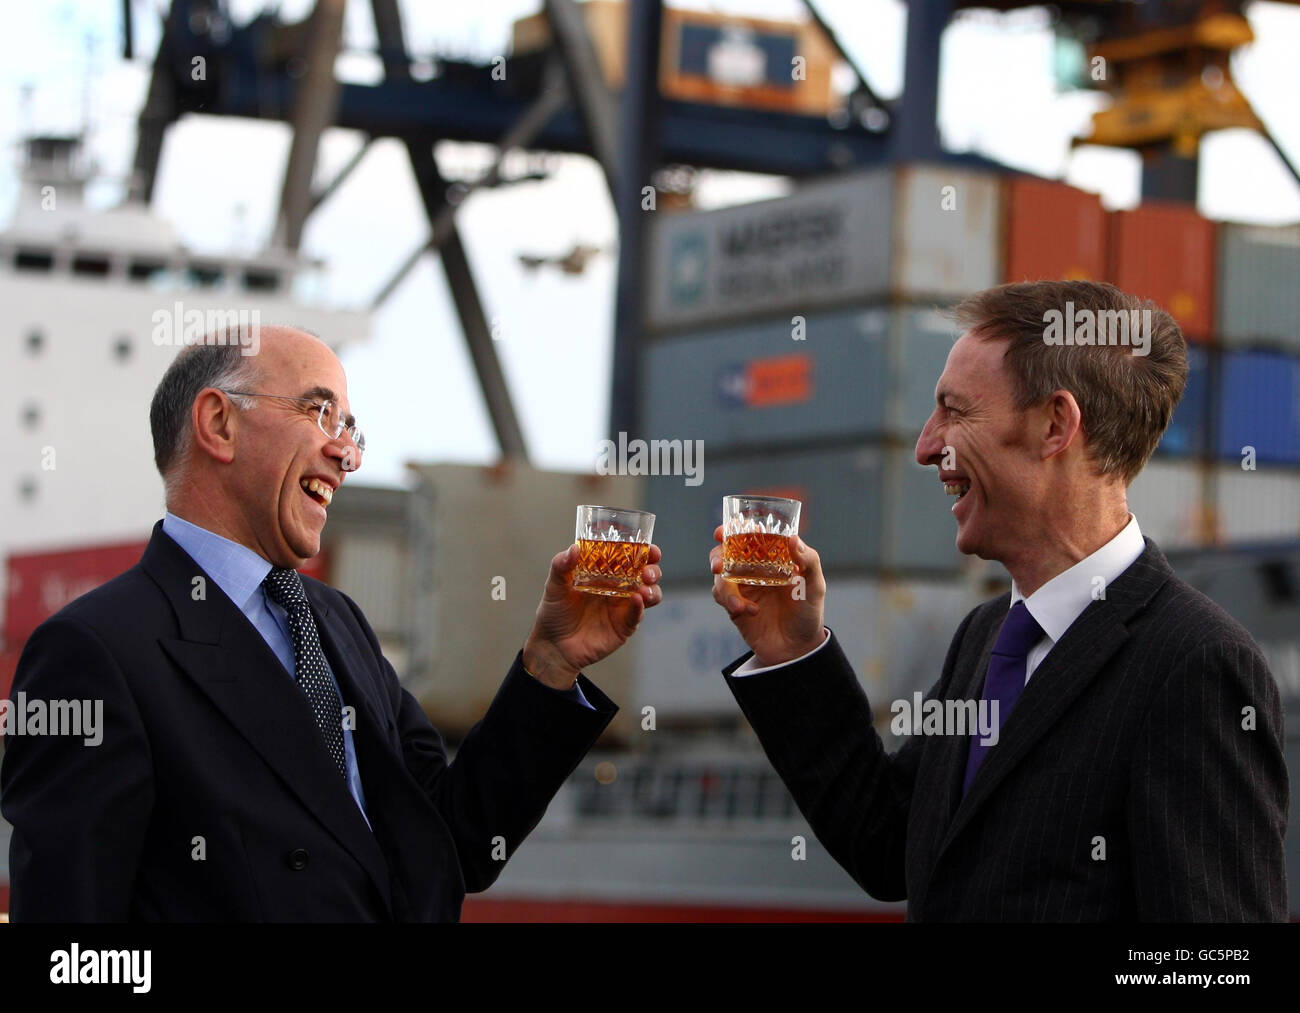 Scottish Secretary Jim Murphy (right) raises a glass of whisky with the chief executive of the Scotch Whisky Association Gavin Hewitt, as the new Scotch whisky regulations come into effect, at Grangemouth Docks, Falkirk, Scotland. Stock Photo